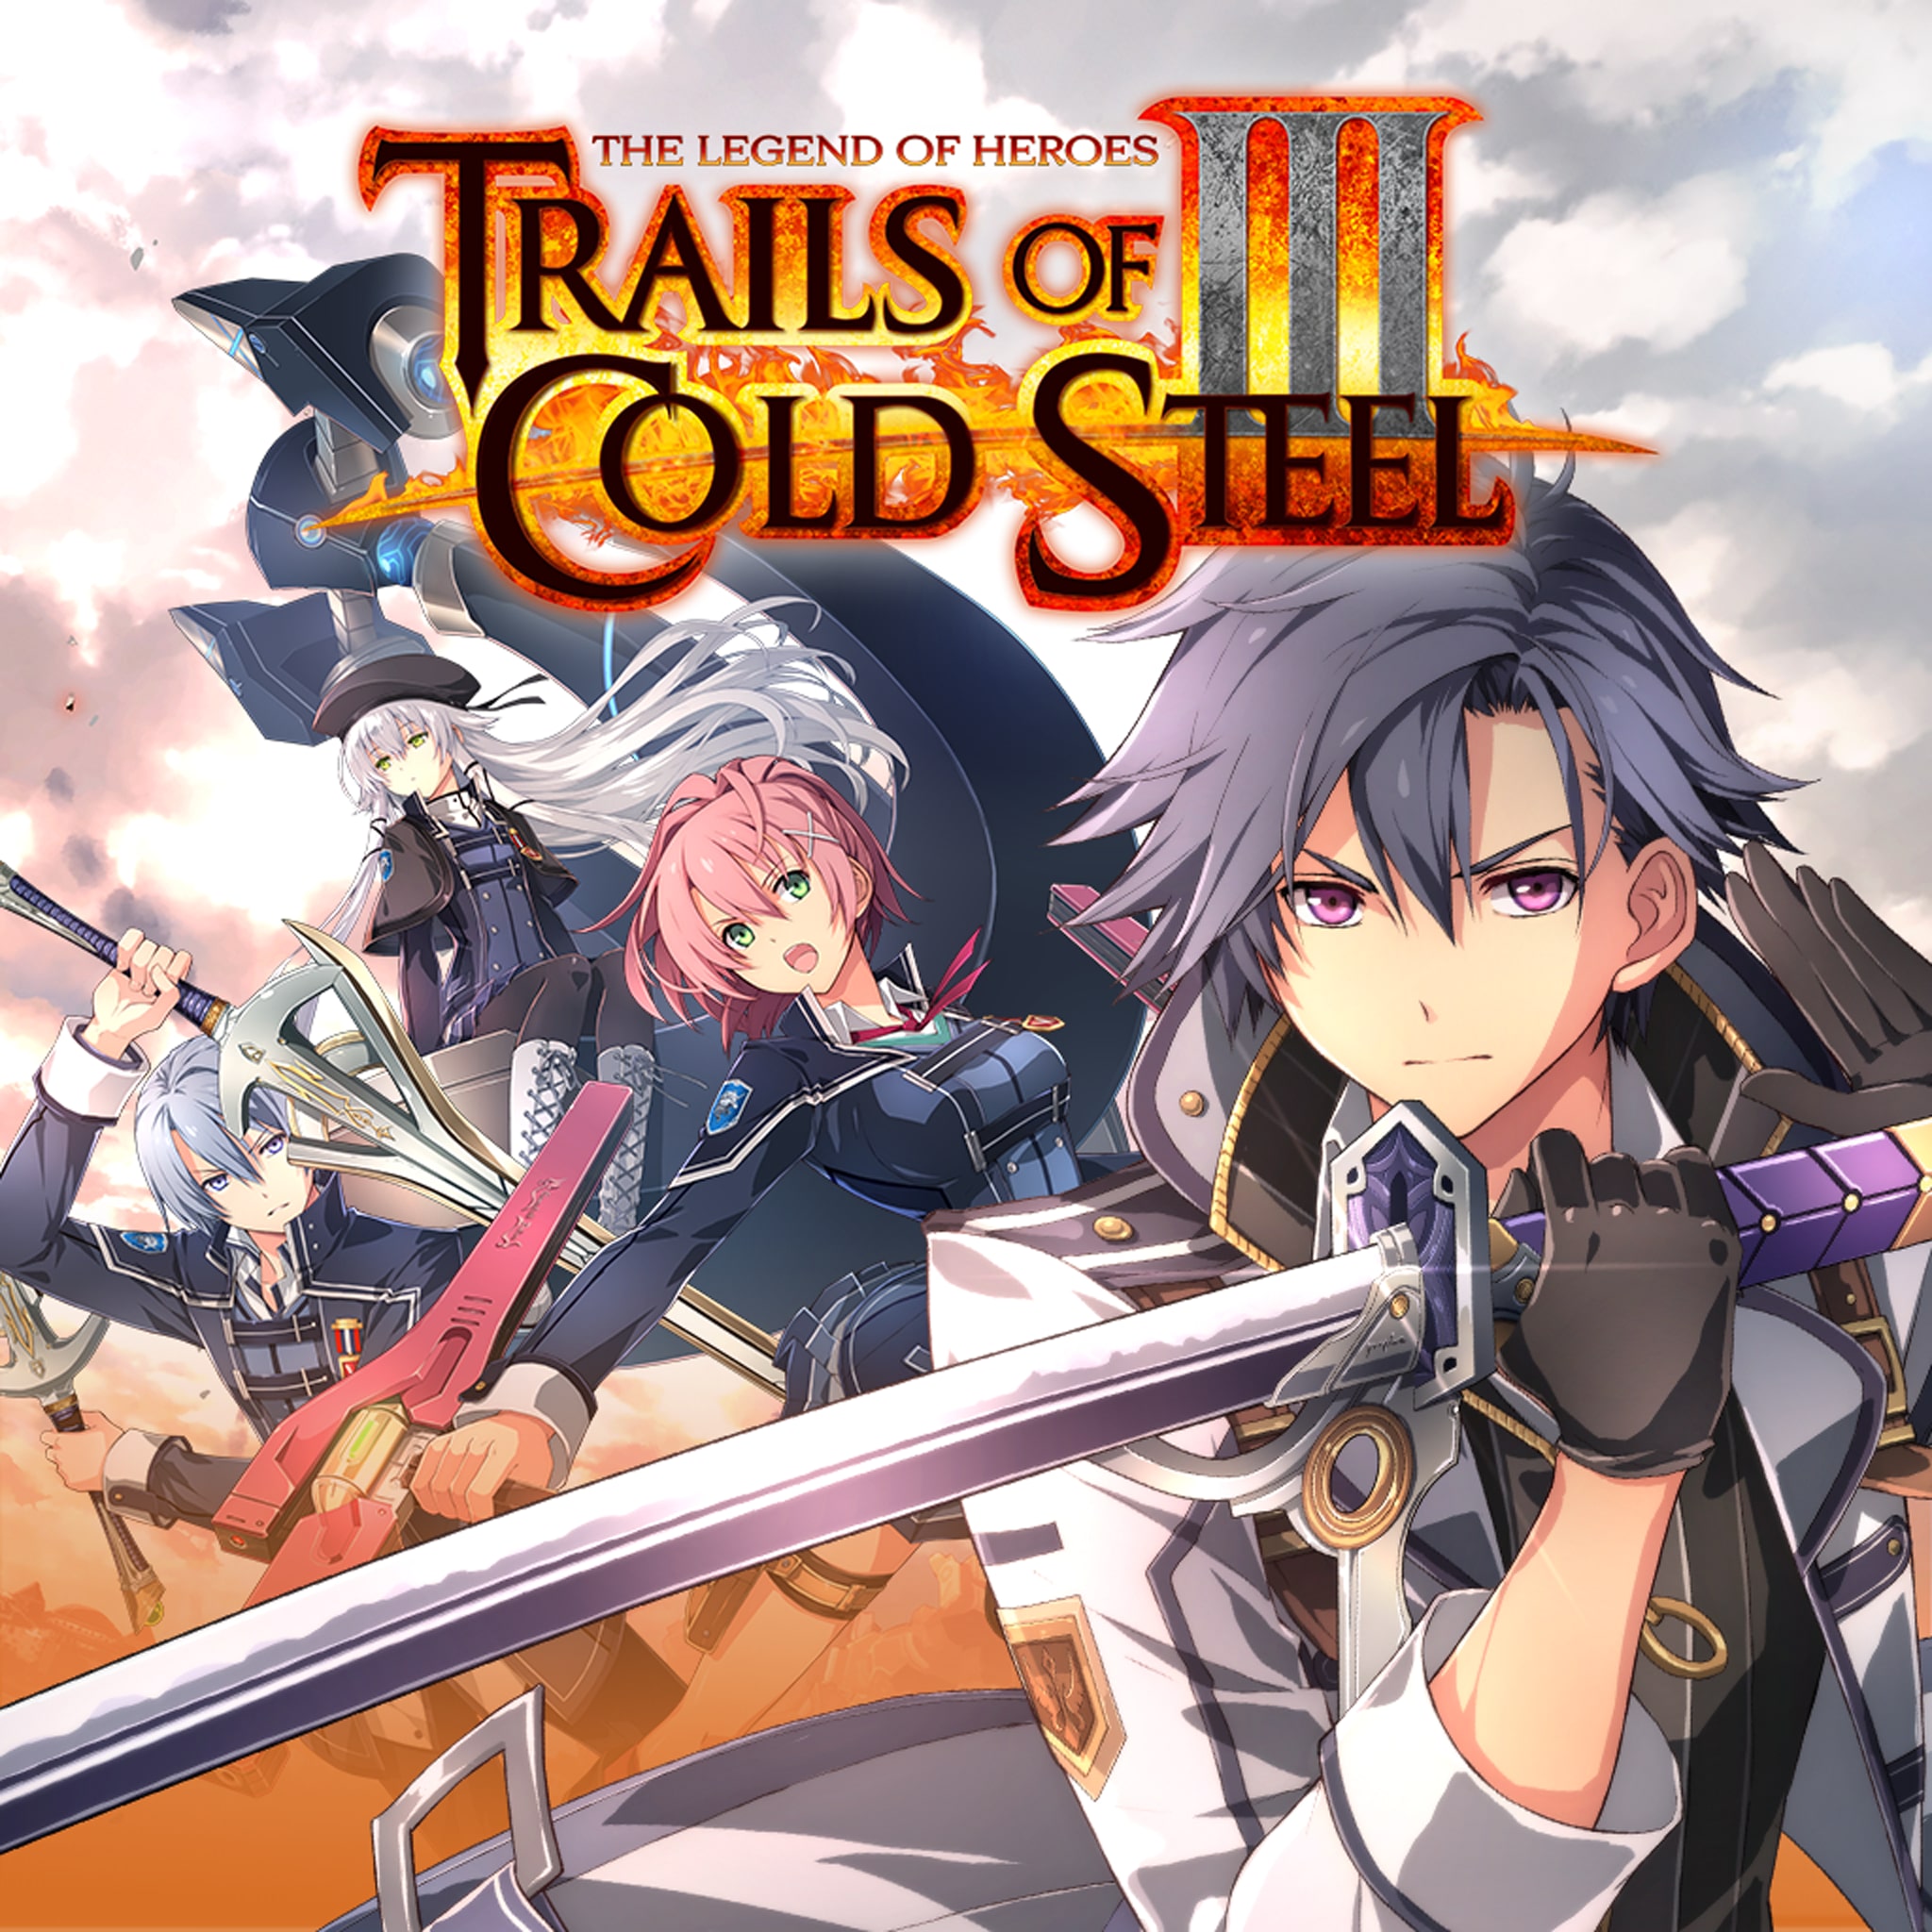 trails of cold steel 3 ps4